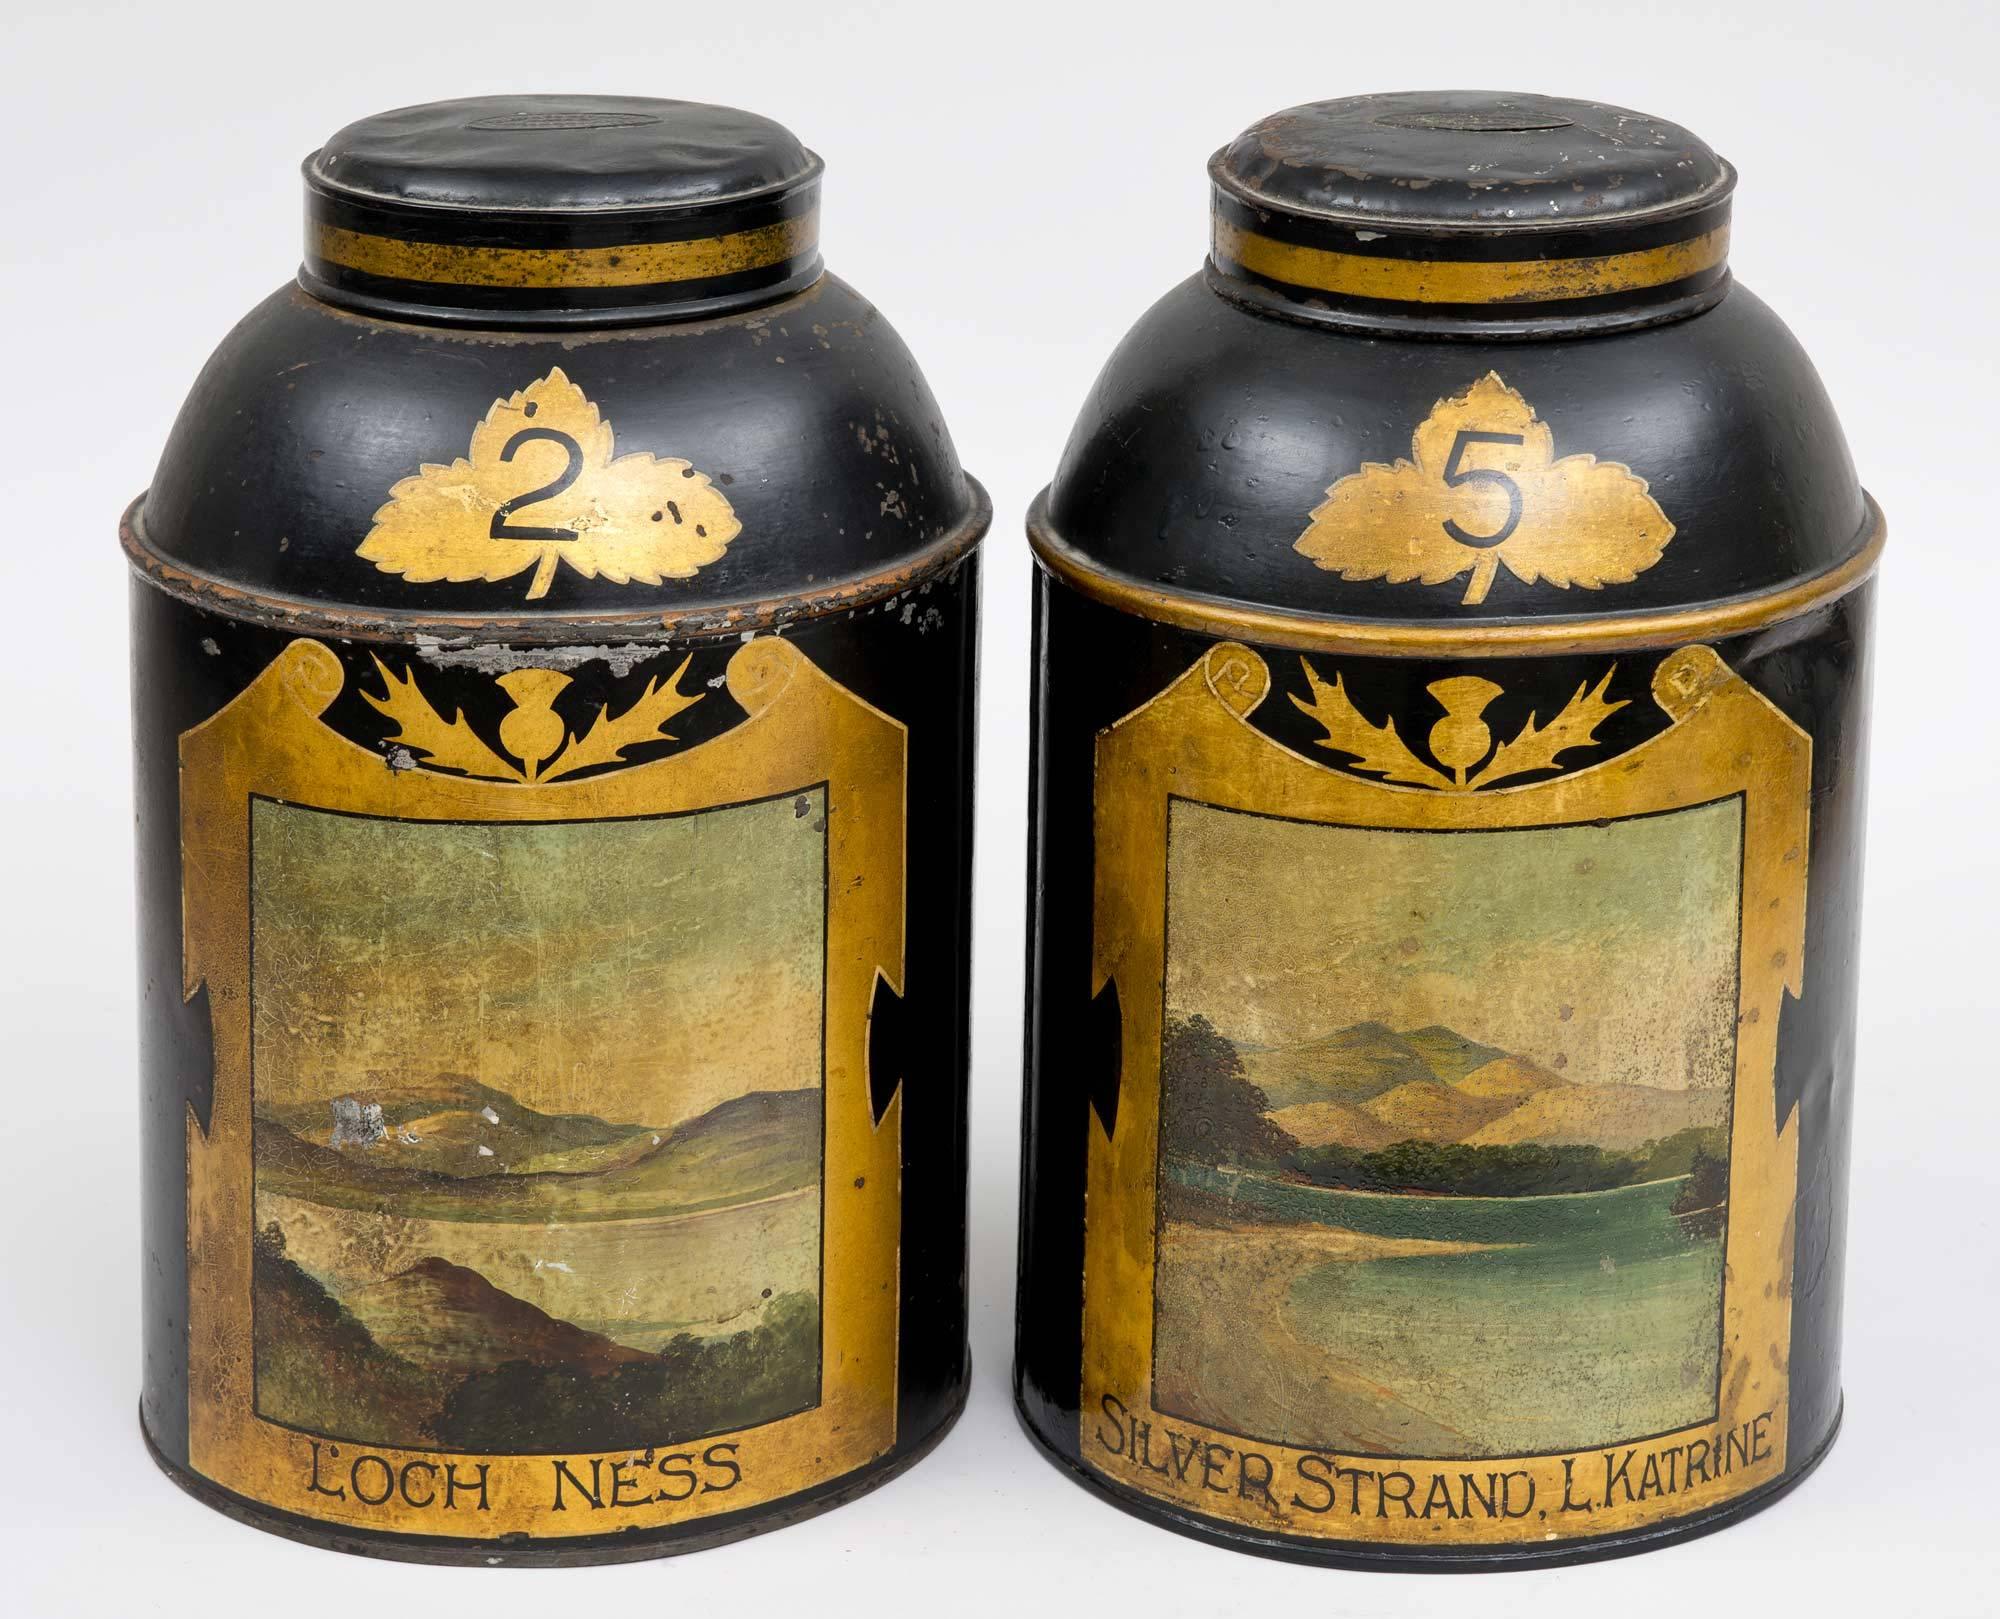 Pair of Scottish tole tea canisters, one with a view of Loch Ness within a gilded frame with a thistle at the top, marked 2; the other a view of Silver Strand, Loch Katrine, also within a gilded frame with a thistle at the top, marked 5. The label